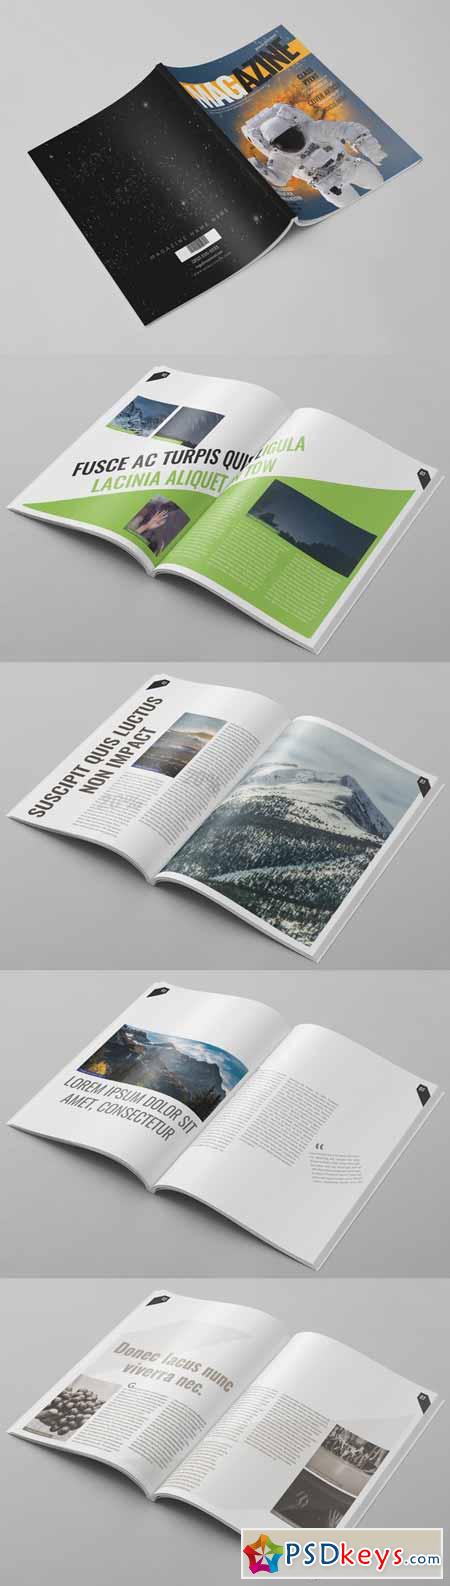 14 Pages Photoshop Magazine Template 241981